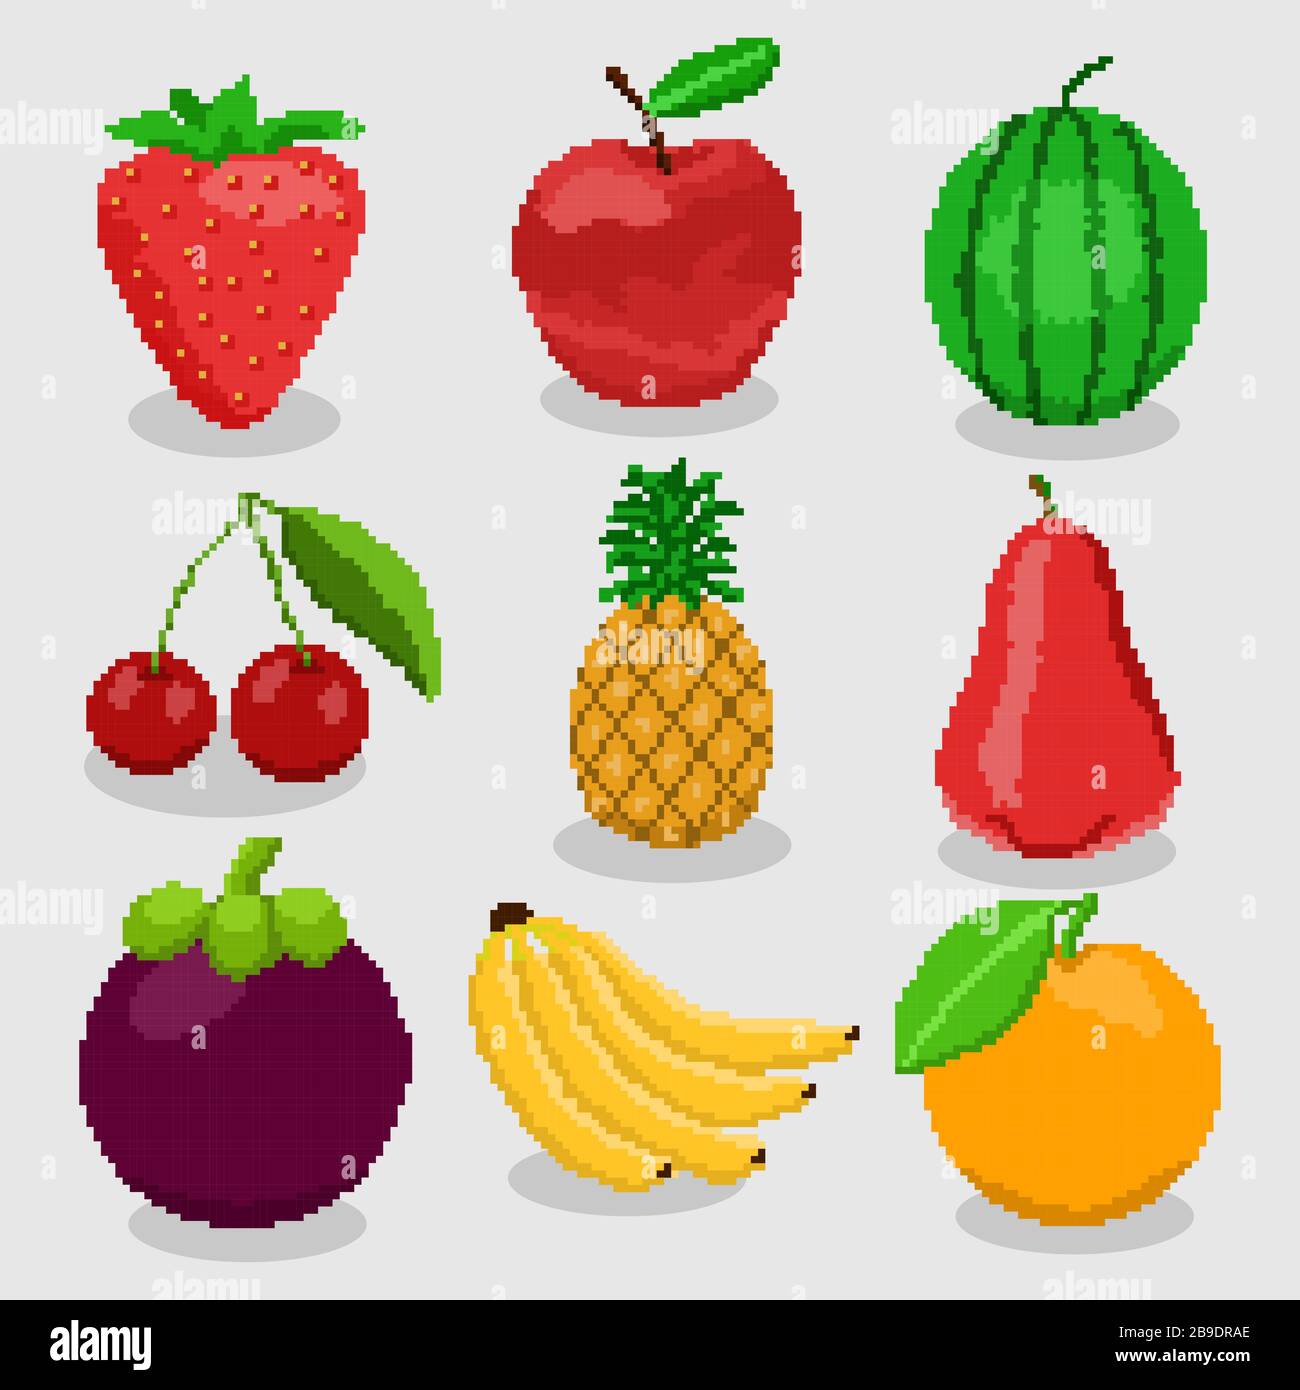 Pixel Fruits for everyone (FREE) - Release Announcements 